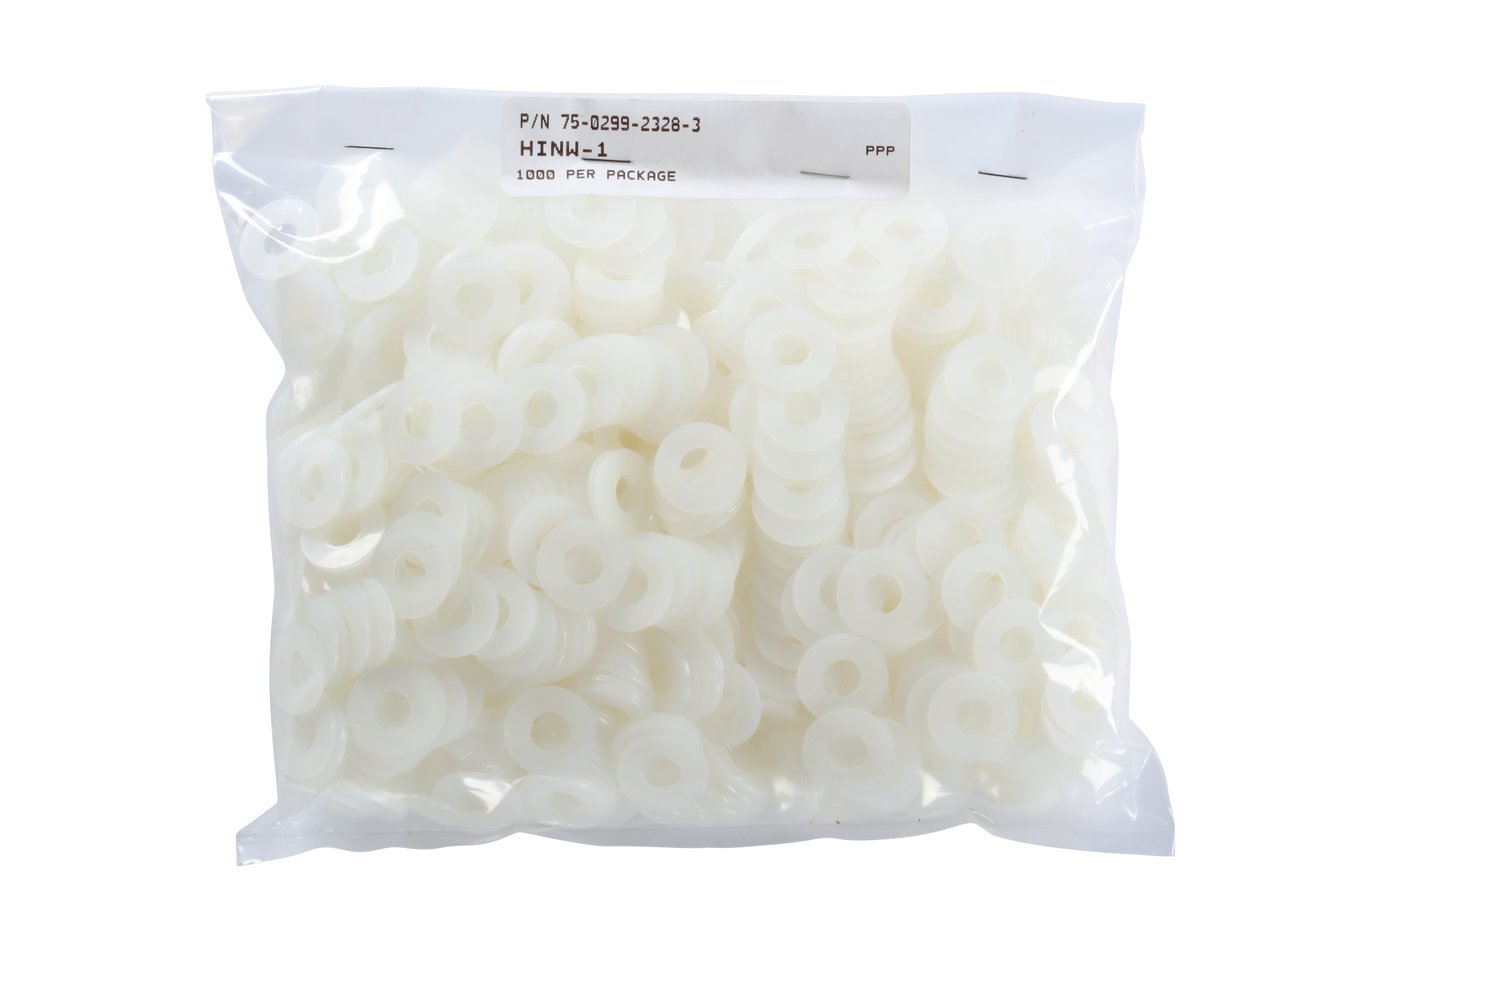 7010388501 - 3M Nylon Washers Hinw-1, 3/8 in ID, 7/8 in OD 1000/Package